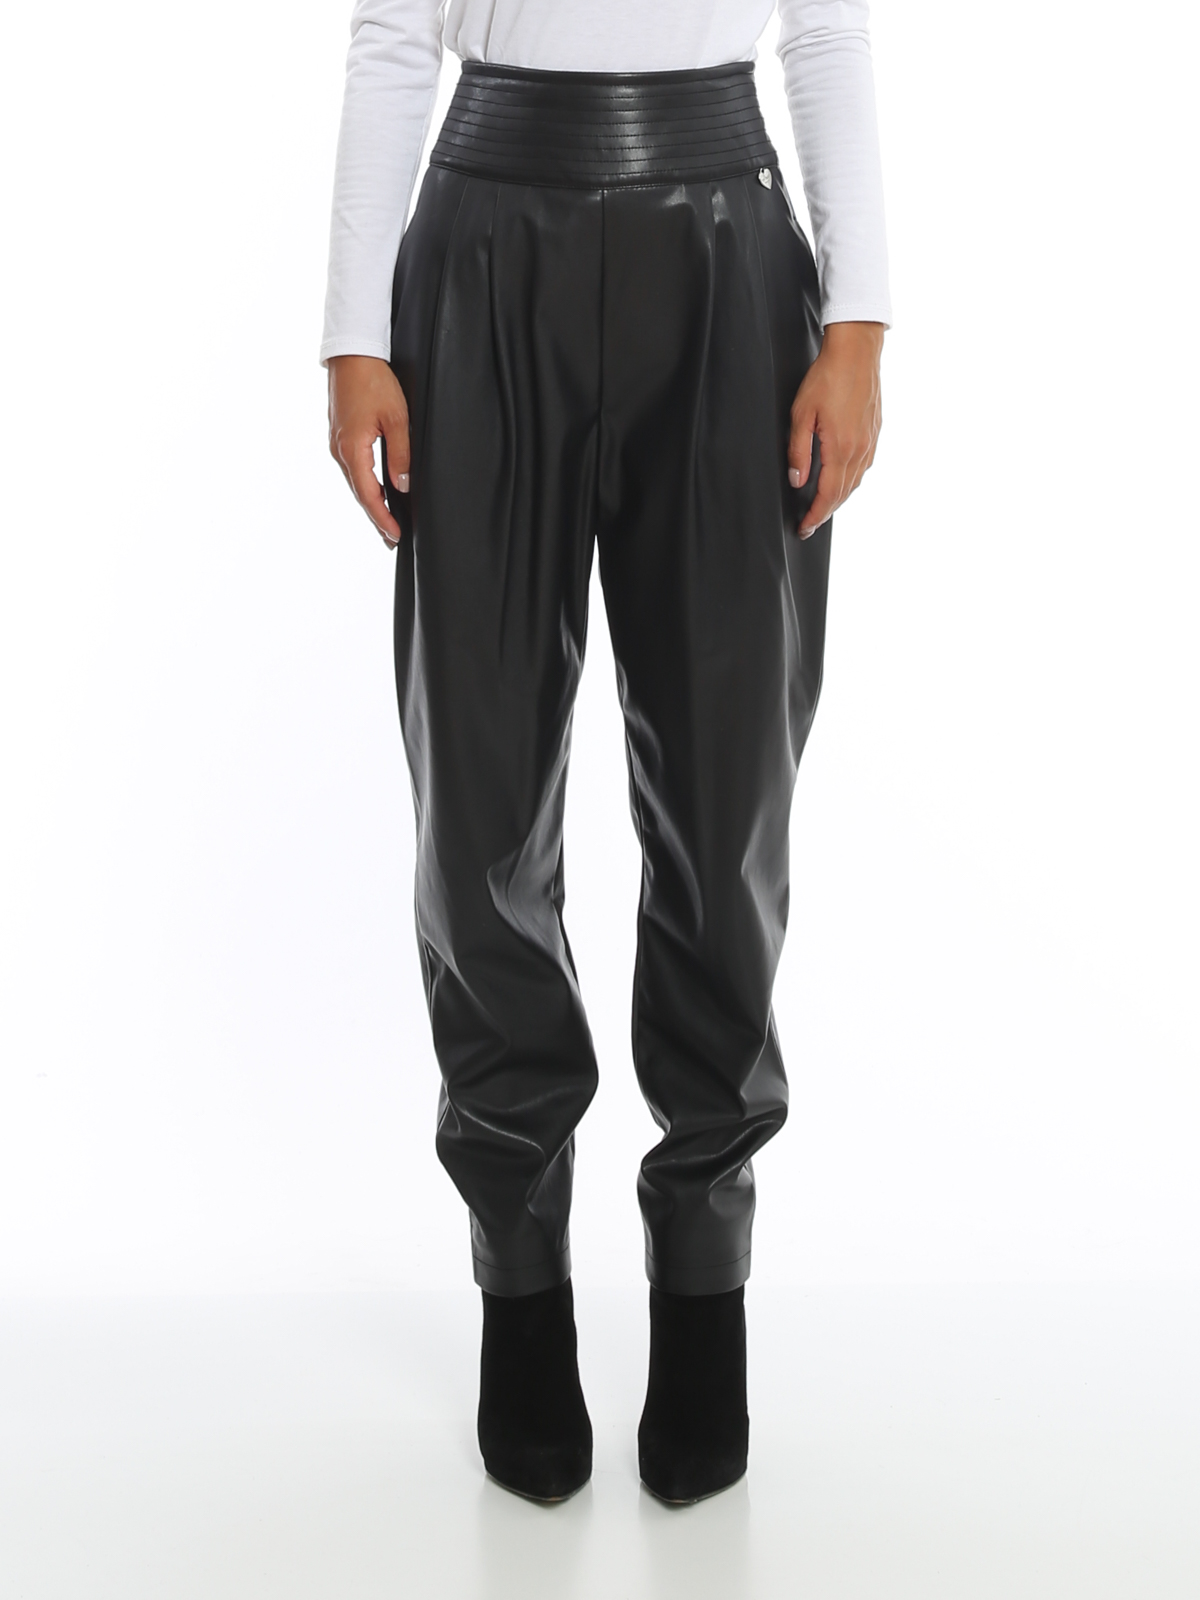 Buy Friends Like These PU Paperbag Trousers from the Next UK online shop